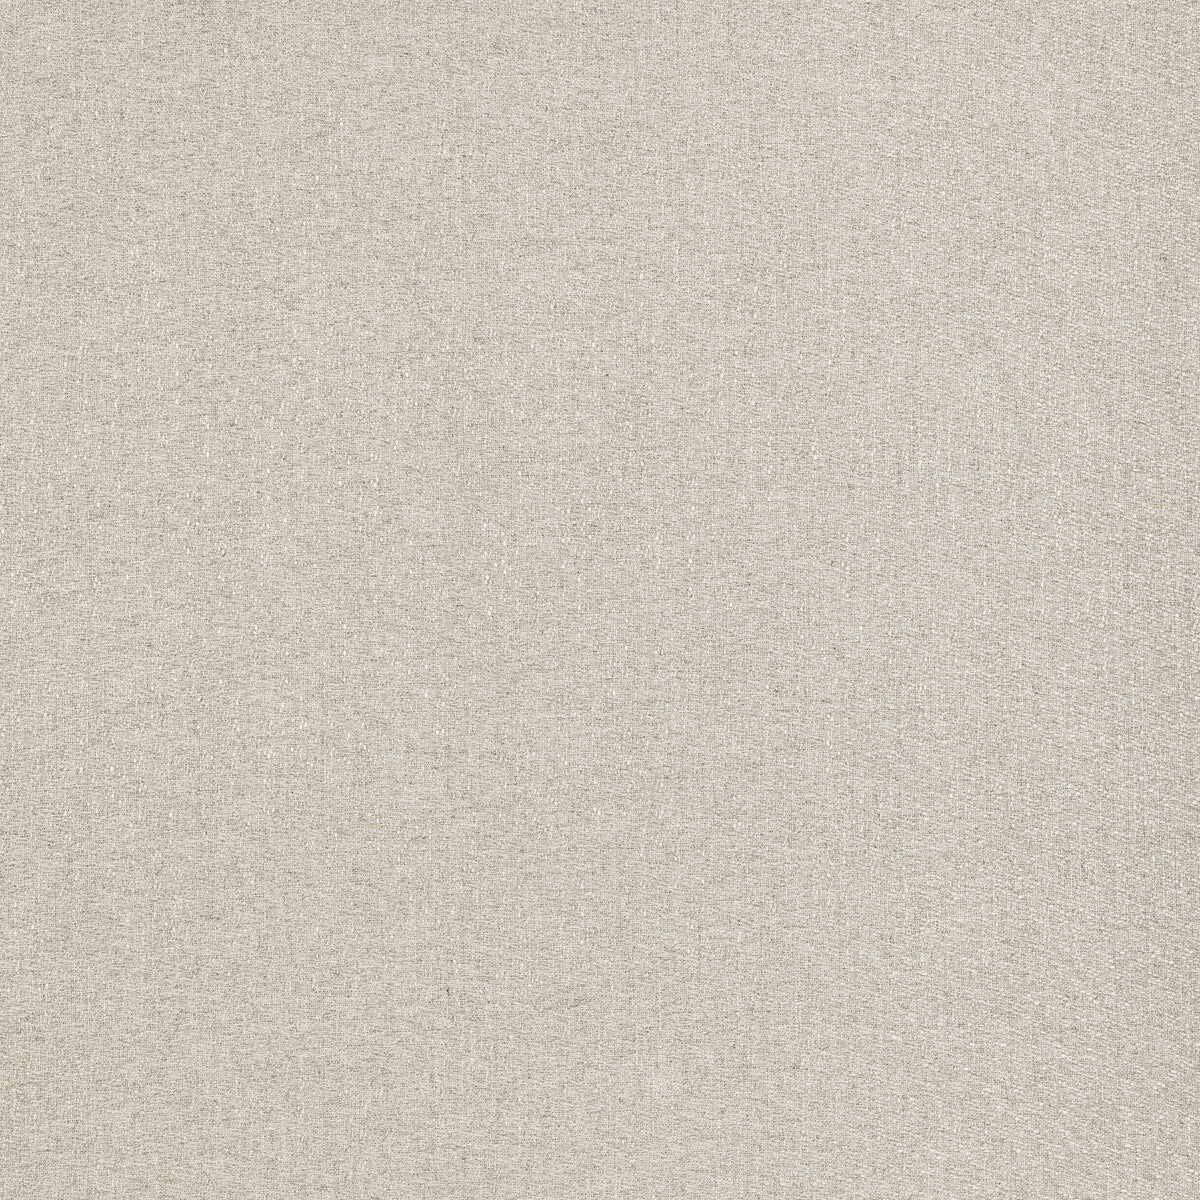 Dolomite fabric in linen color - pattern ED85394.110.0 - by Threads in the Quintessential Naturals collection